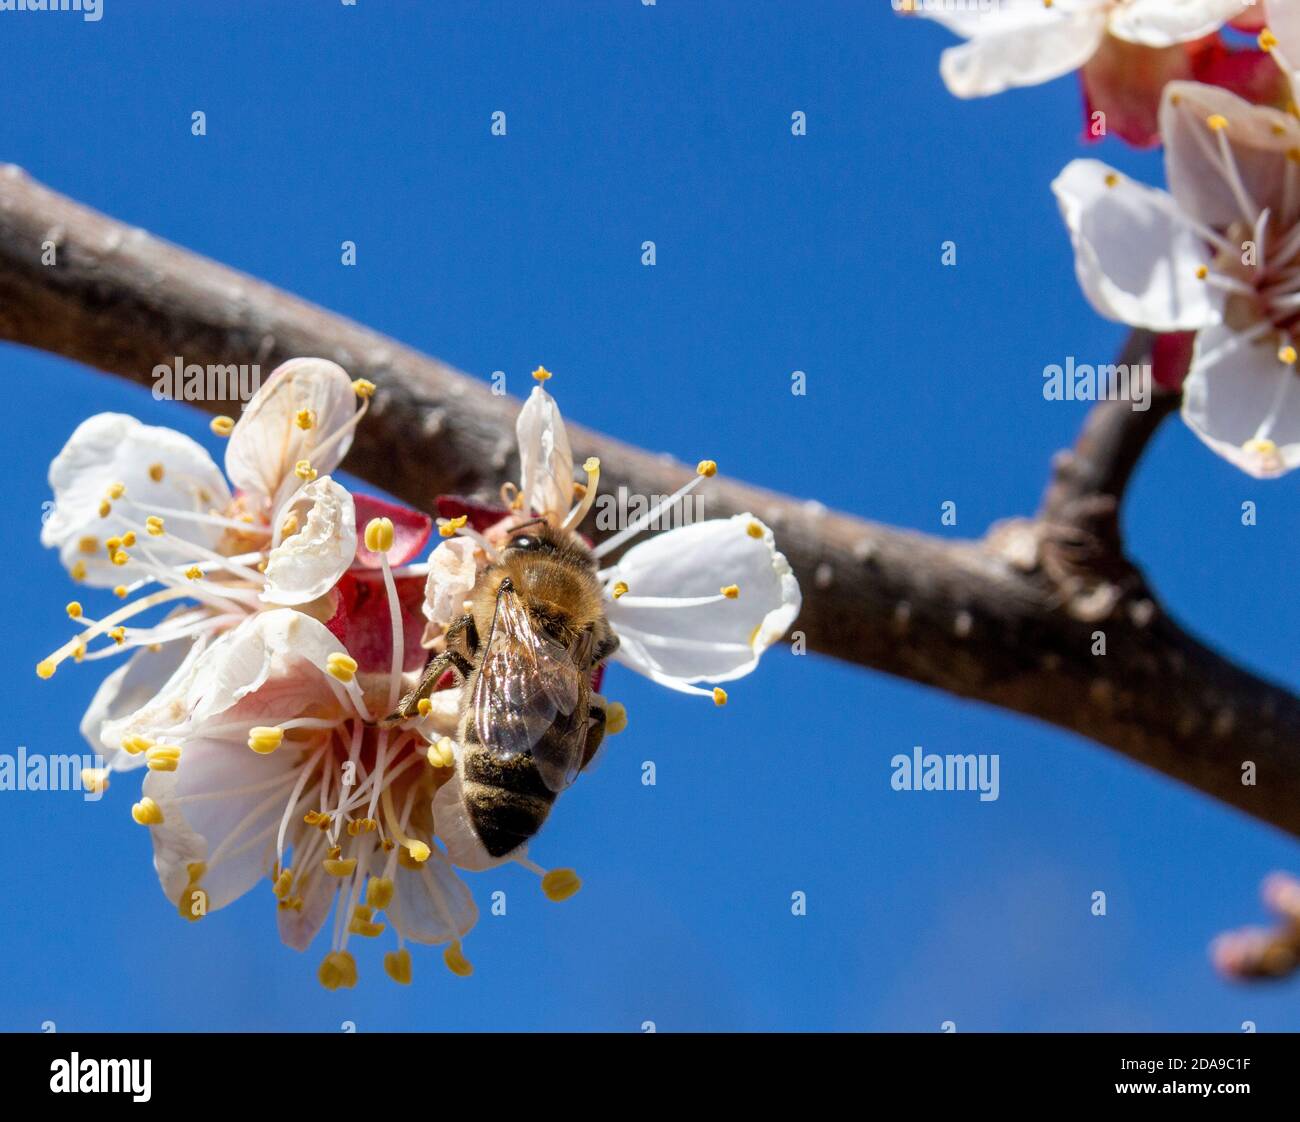 Damaged by frost inflorescence of apricot fruit trees, the damage caused to agriculture by adverse weather conditions in the spring. Stock Photo